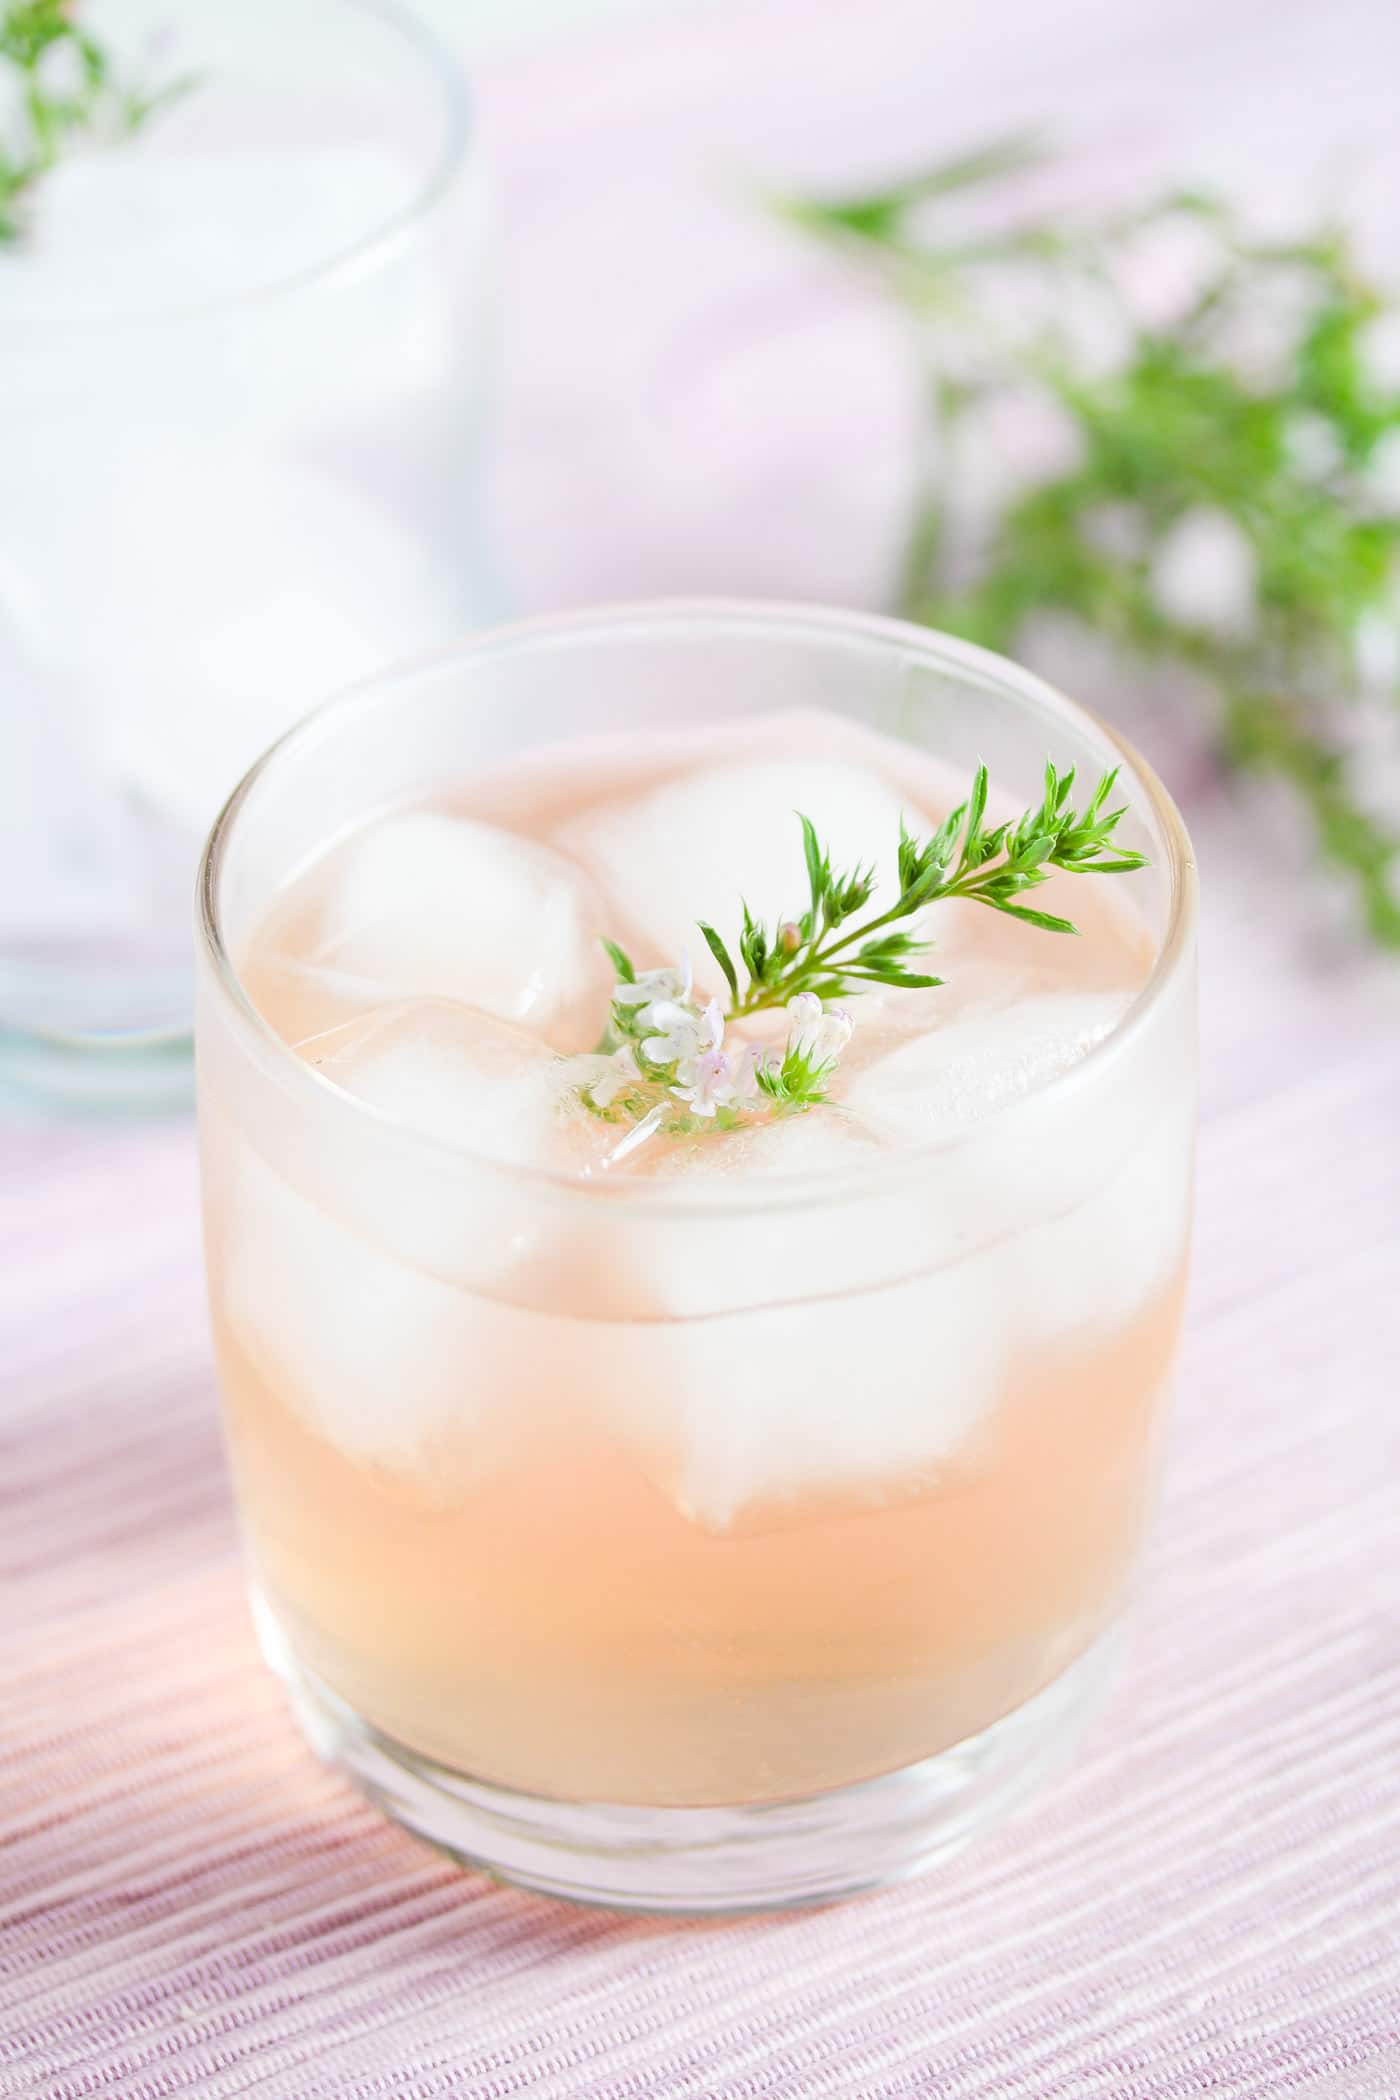 gin flavored with rhubarb and ginger served on ice